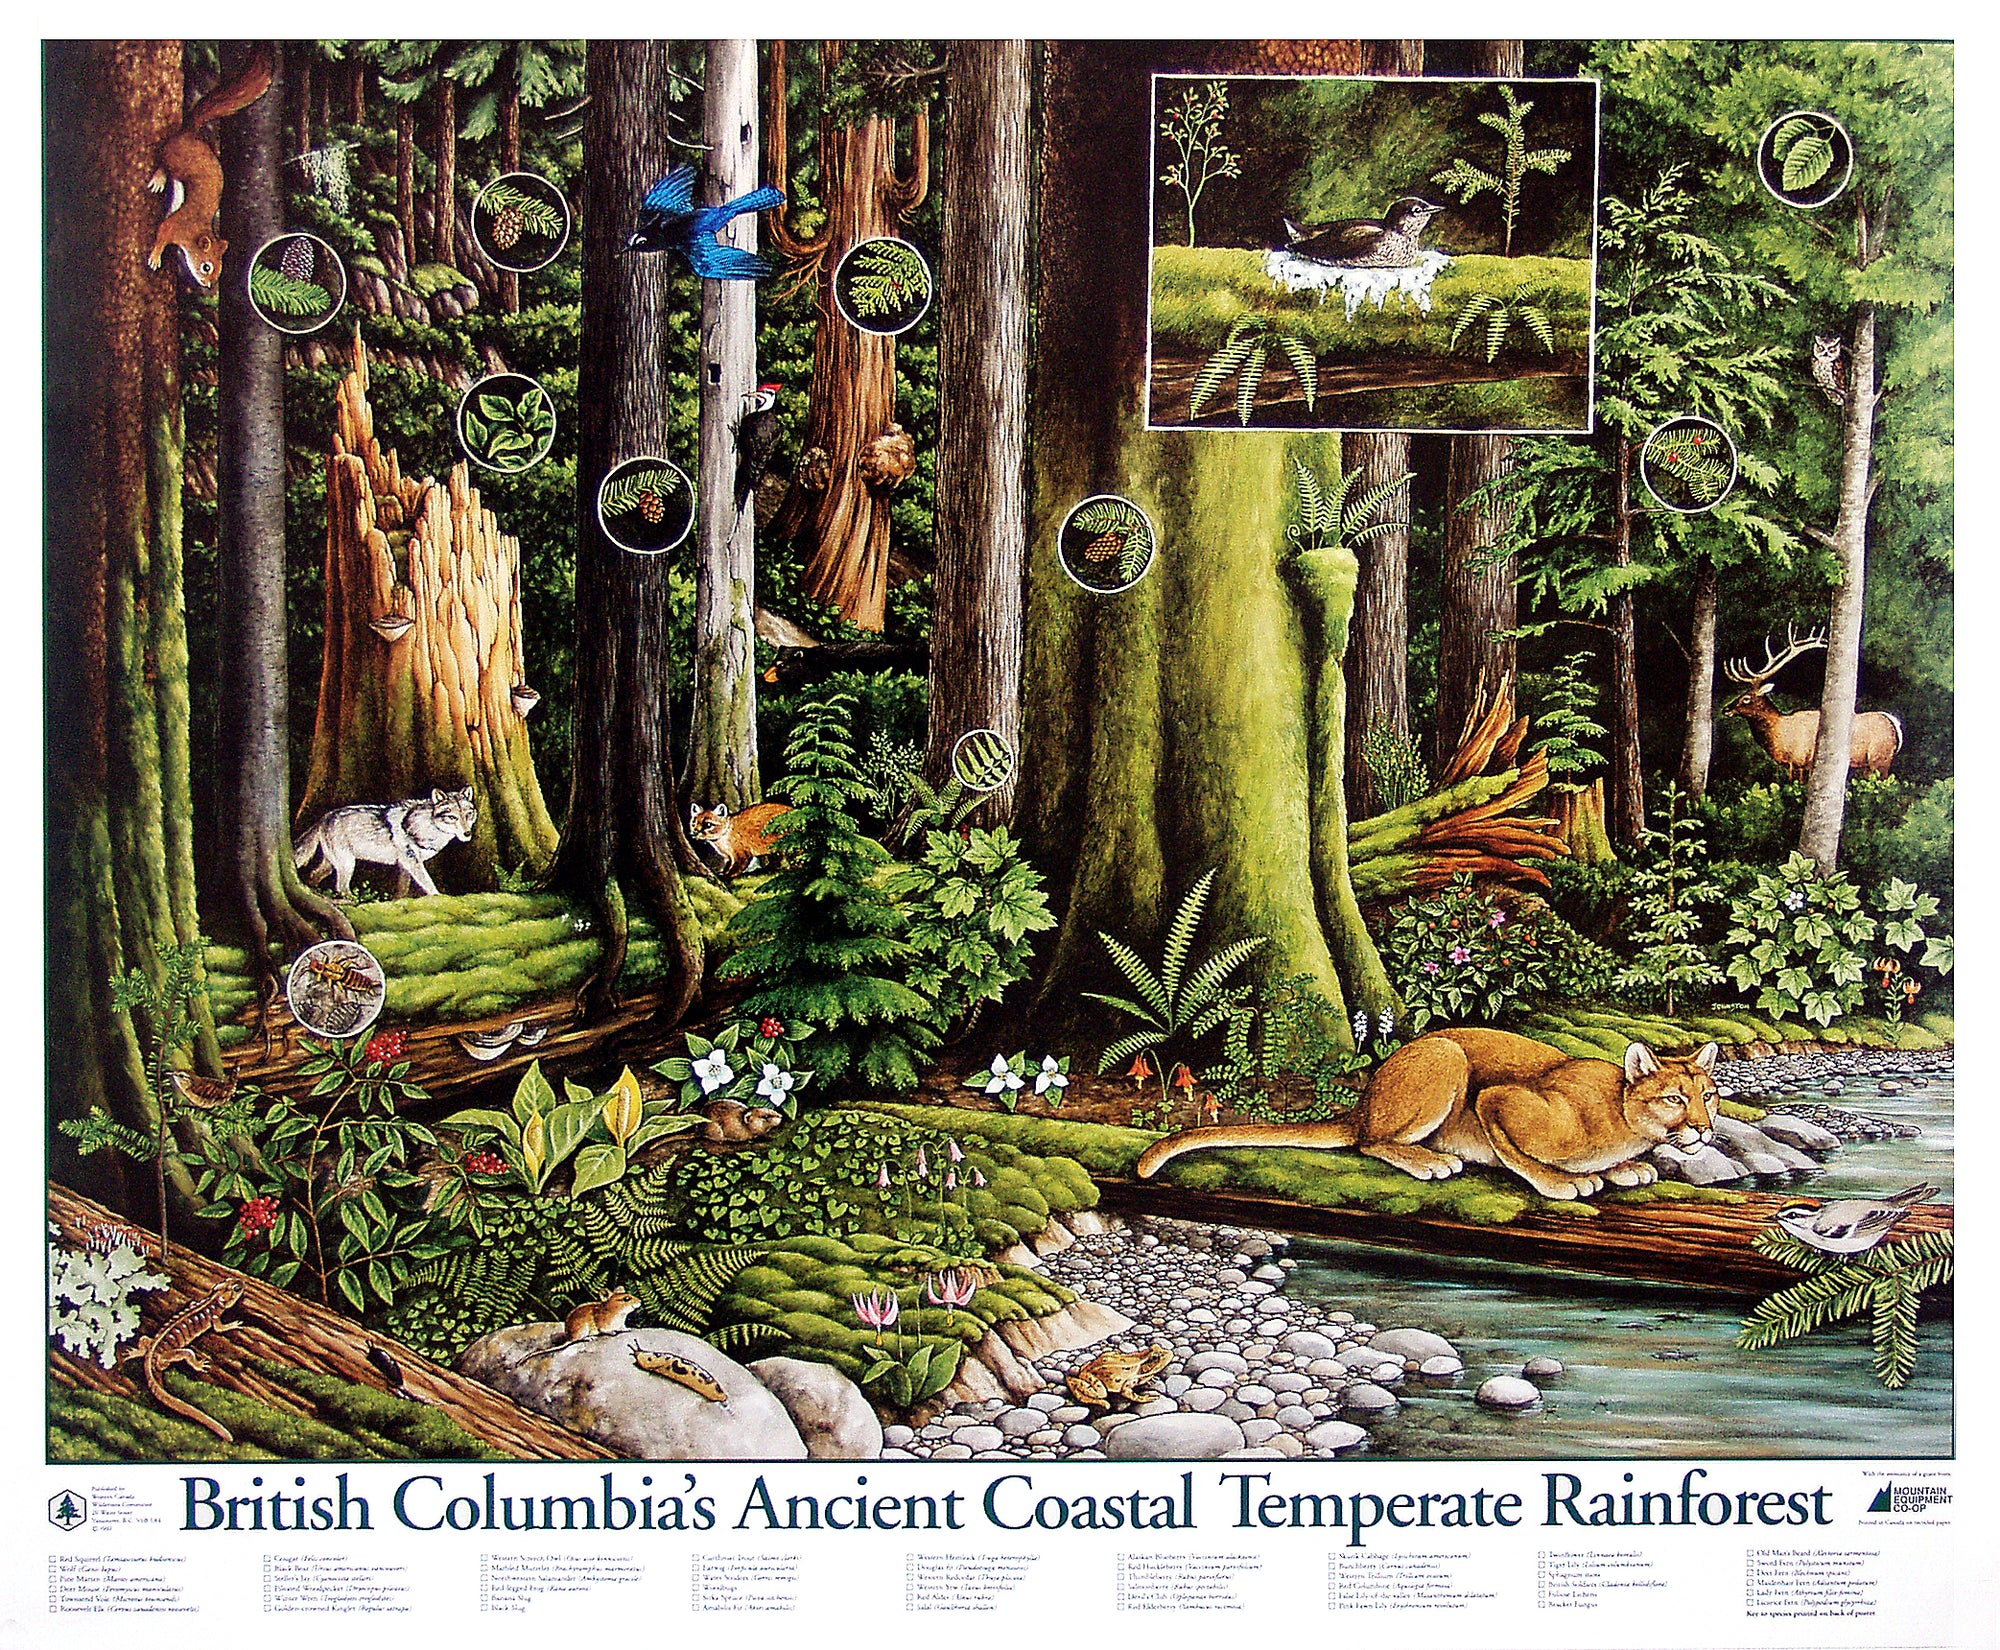 A poster with a diagram of animals and plants in an old-growth forest. These include birds, pinecones and cougars. Text on the image says "British Columbia's Ancient Coastal Temperate Rainforest." End of image description.